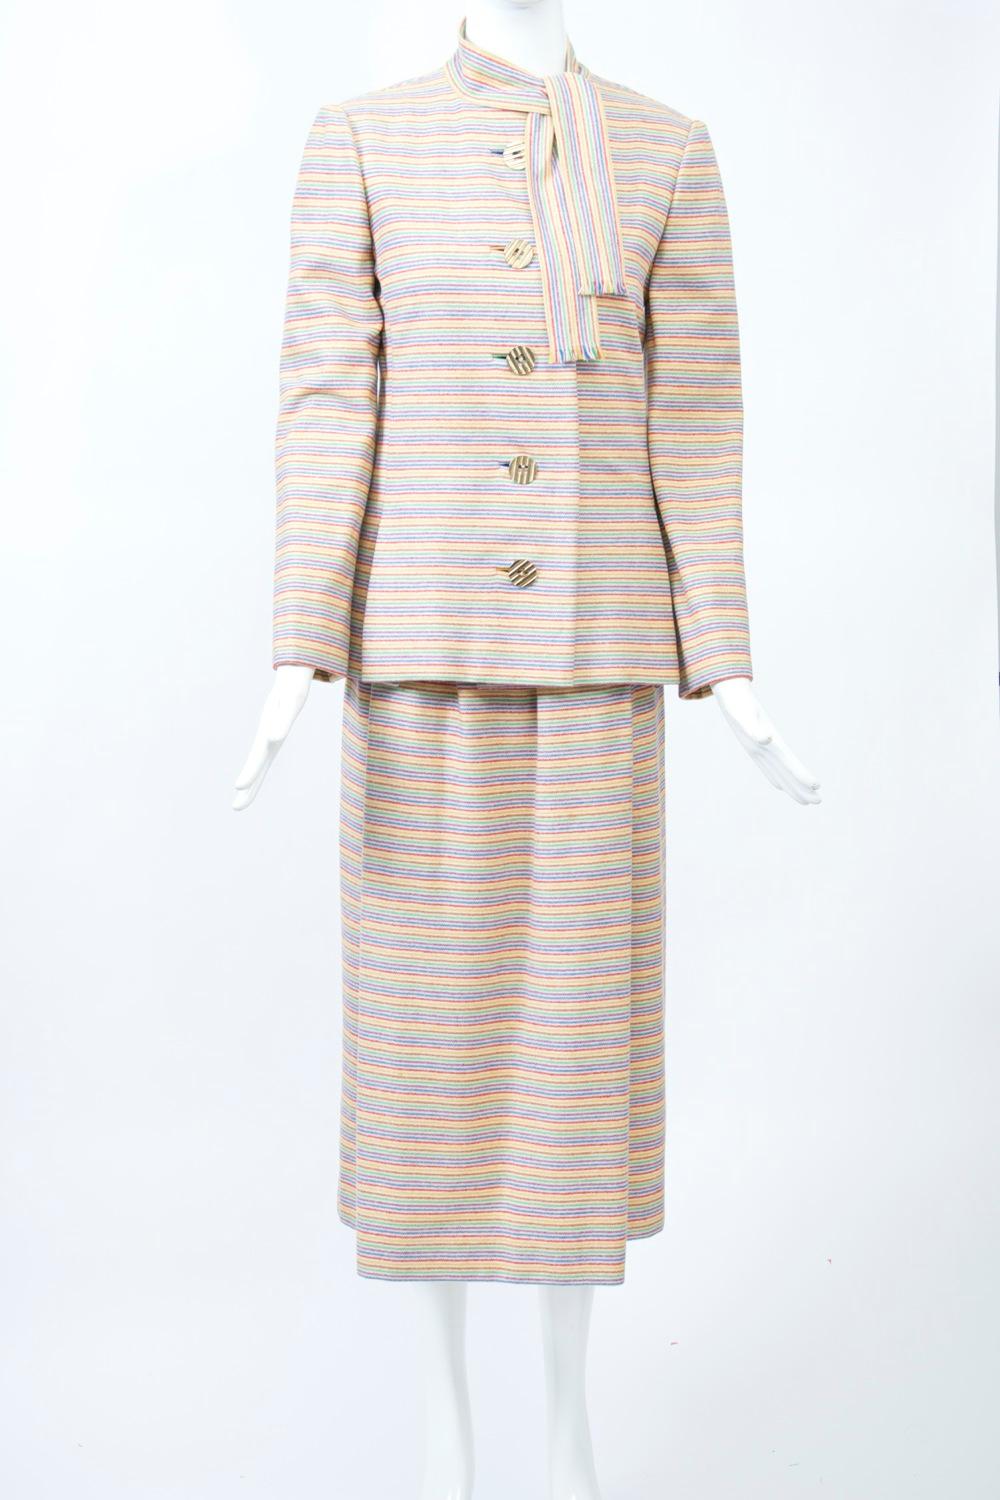 Typical Trigère elegance and workmanship define this 1970s suit in soft wool featuring narrow, horizontal rainbow stripes on an ivory ground. The single-breasted jacket is long and slightly shaped with a tie neck and single pleats towards the sides,